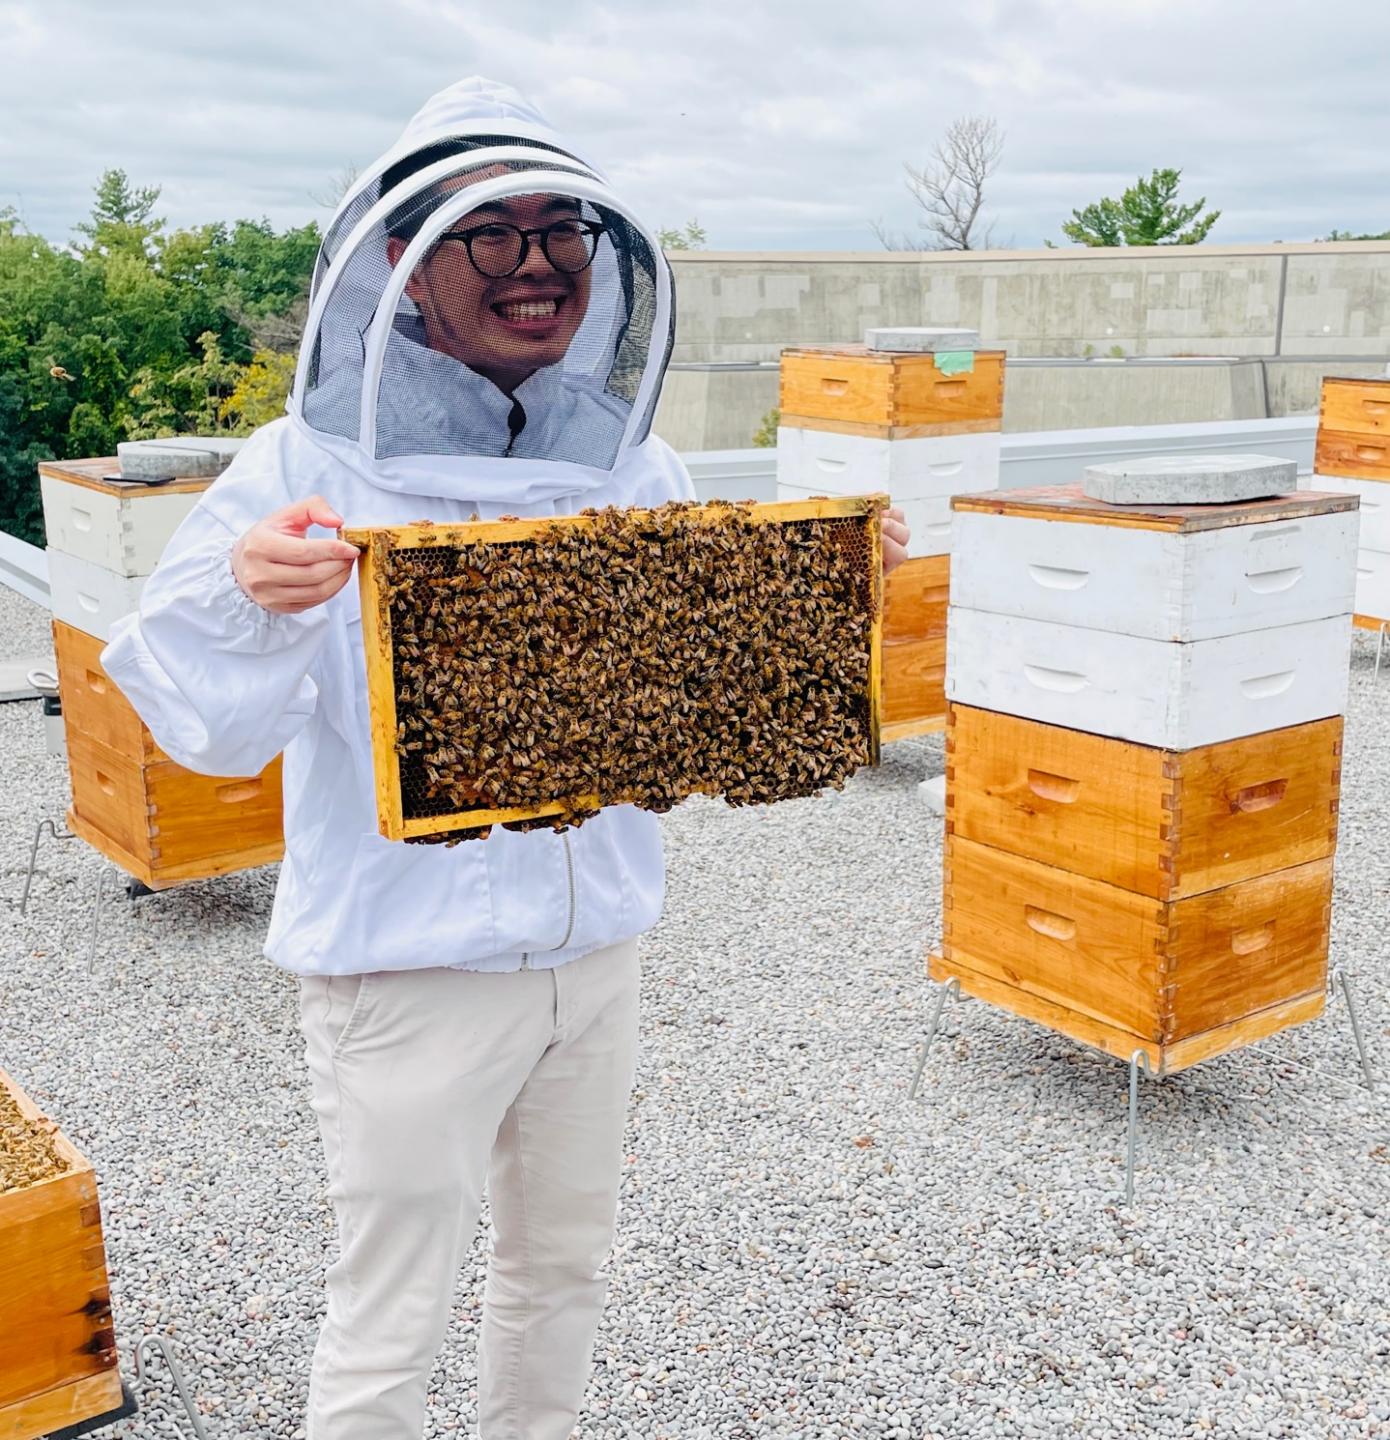 Andrew Sito wearing bee keeper protective gear, holding a tray of live bees at U of T Scarborough rooftop hives